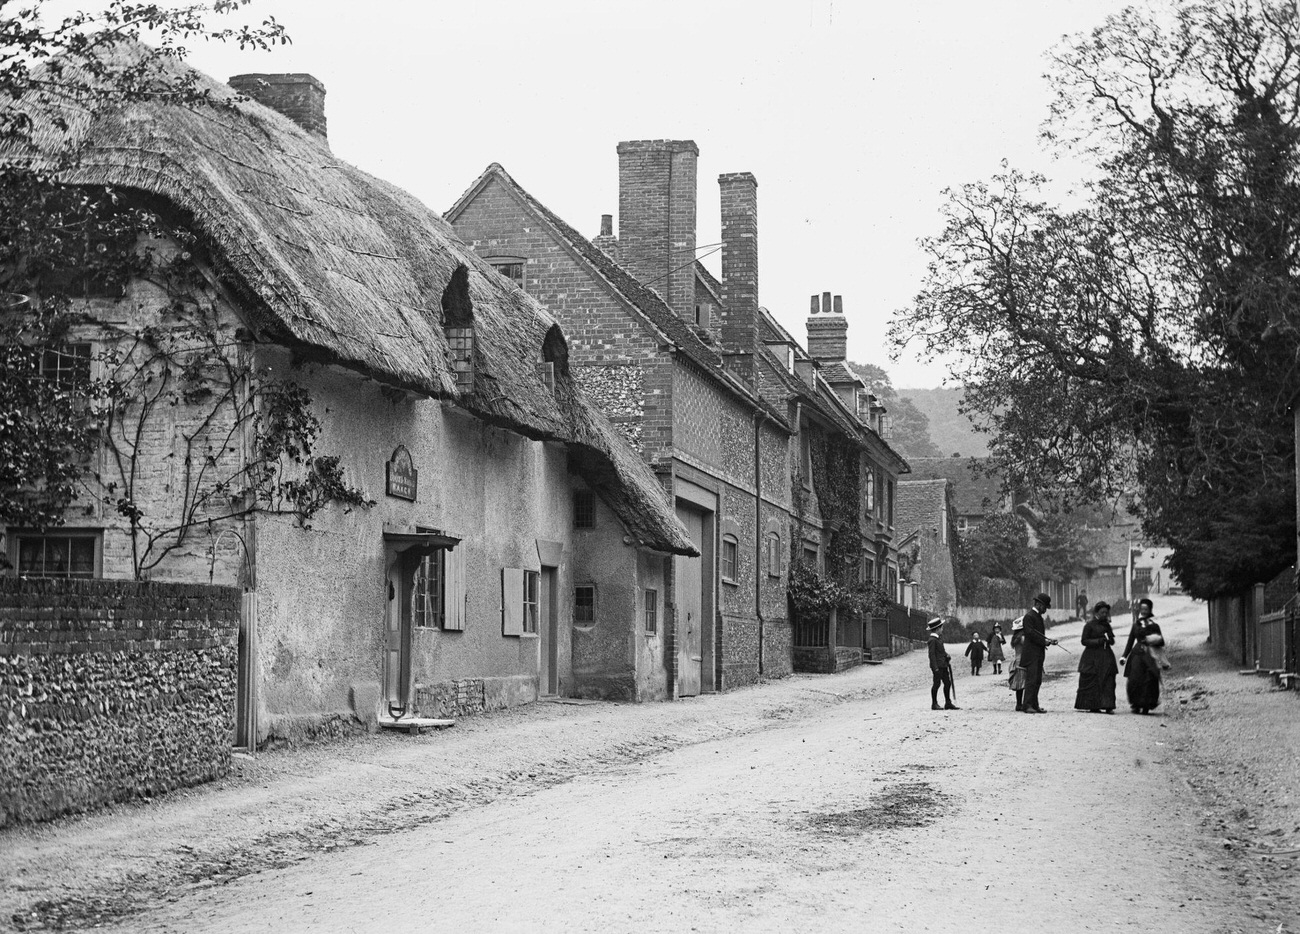 High Street in Streatley, West Berkshire, with The Thatched Cottage, 1885.